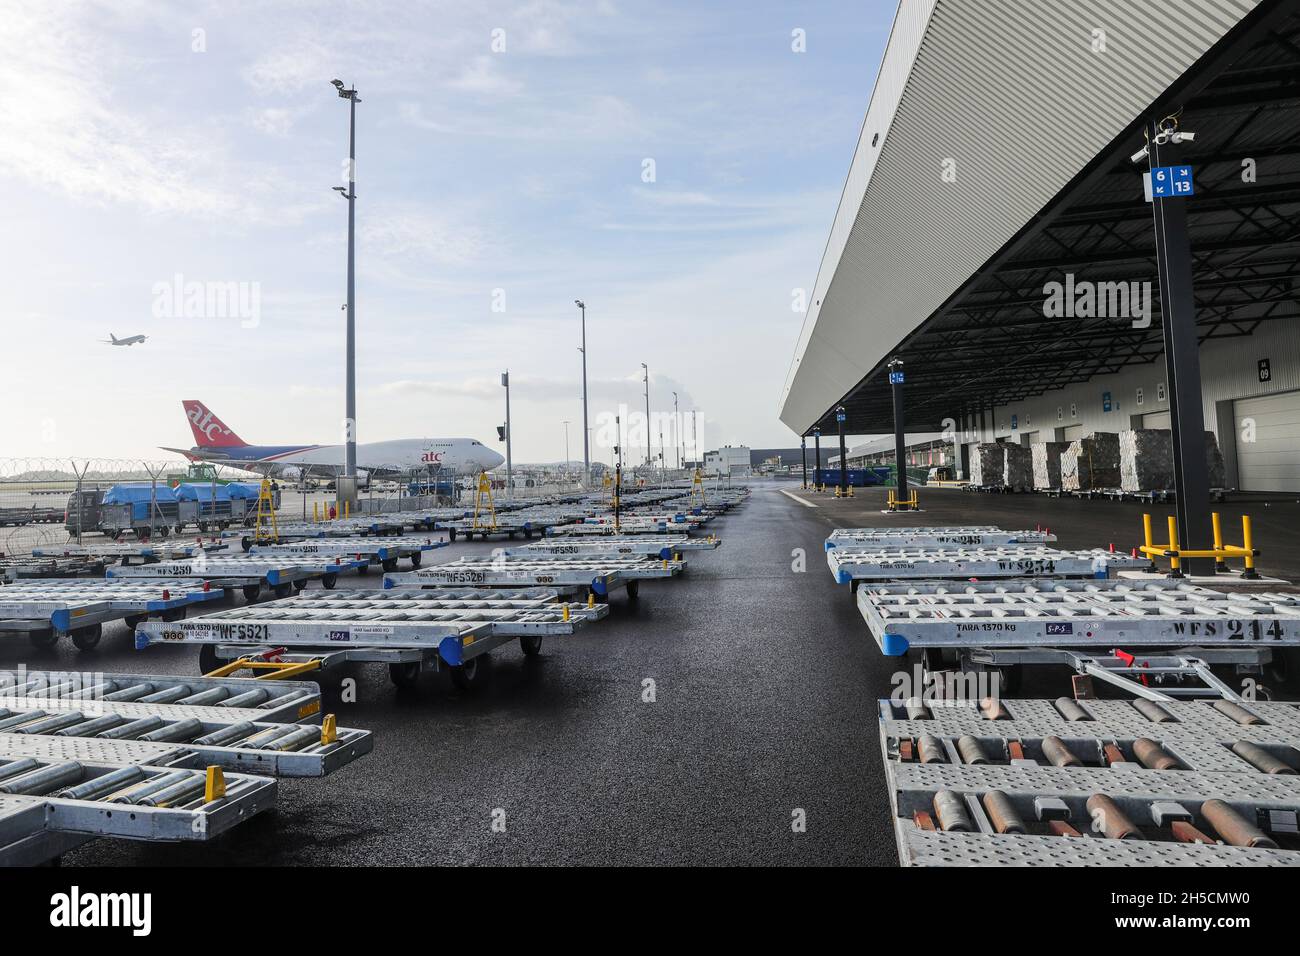 Liege, Belgium. 8th Nov, 2021. Cainiao Network's smart logistics hub is seen at Liege Airport in Grace-Hollogne, Liege Province, Belgium, on Nov. 8, 2021. Cainiao Network, the logistics arm of China's Alibaba Group, officially opened Monday its first smart logistics hub at Liege Airport in Belgium. Credit: Zheng Huansong/Xinhua/Alamy Live News Stock Photo